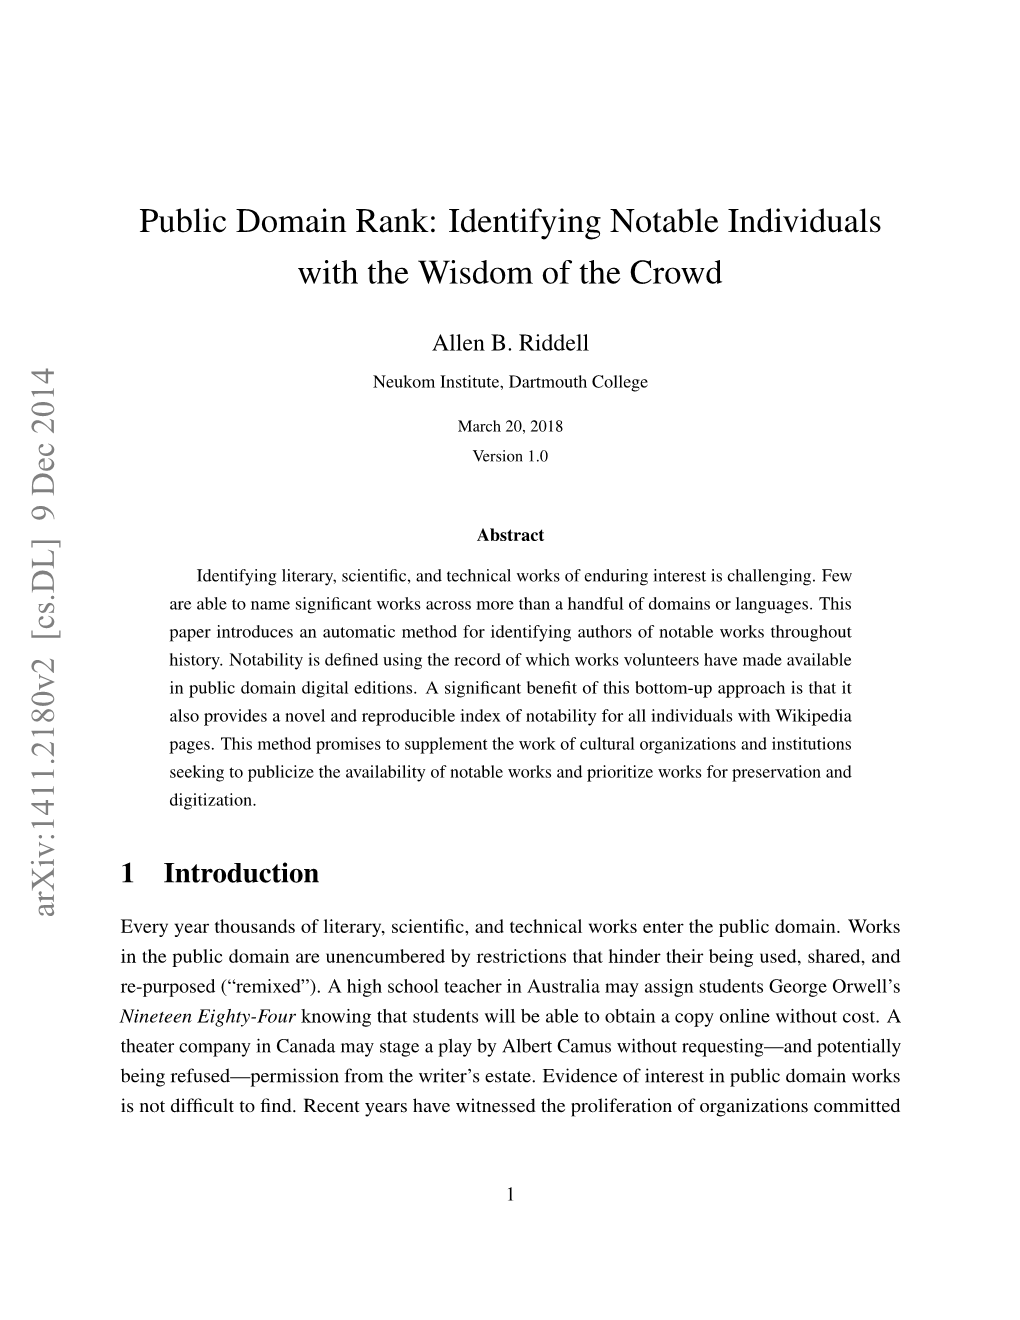 Public Domain Rank: Identifying Notable Individuals with the Wisdom of the Crowd